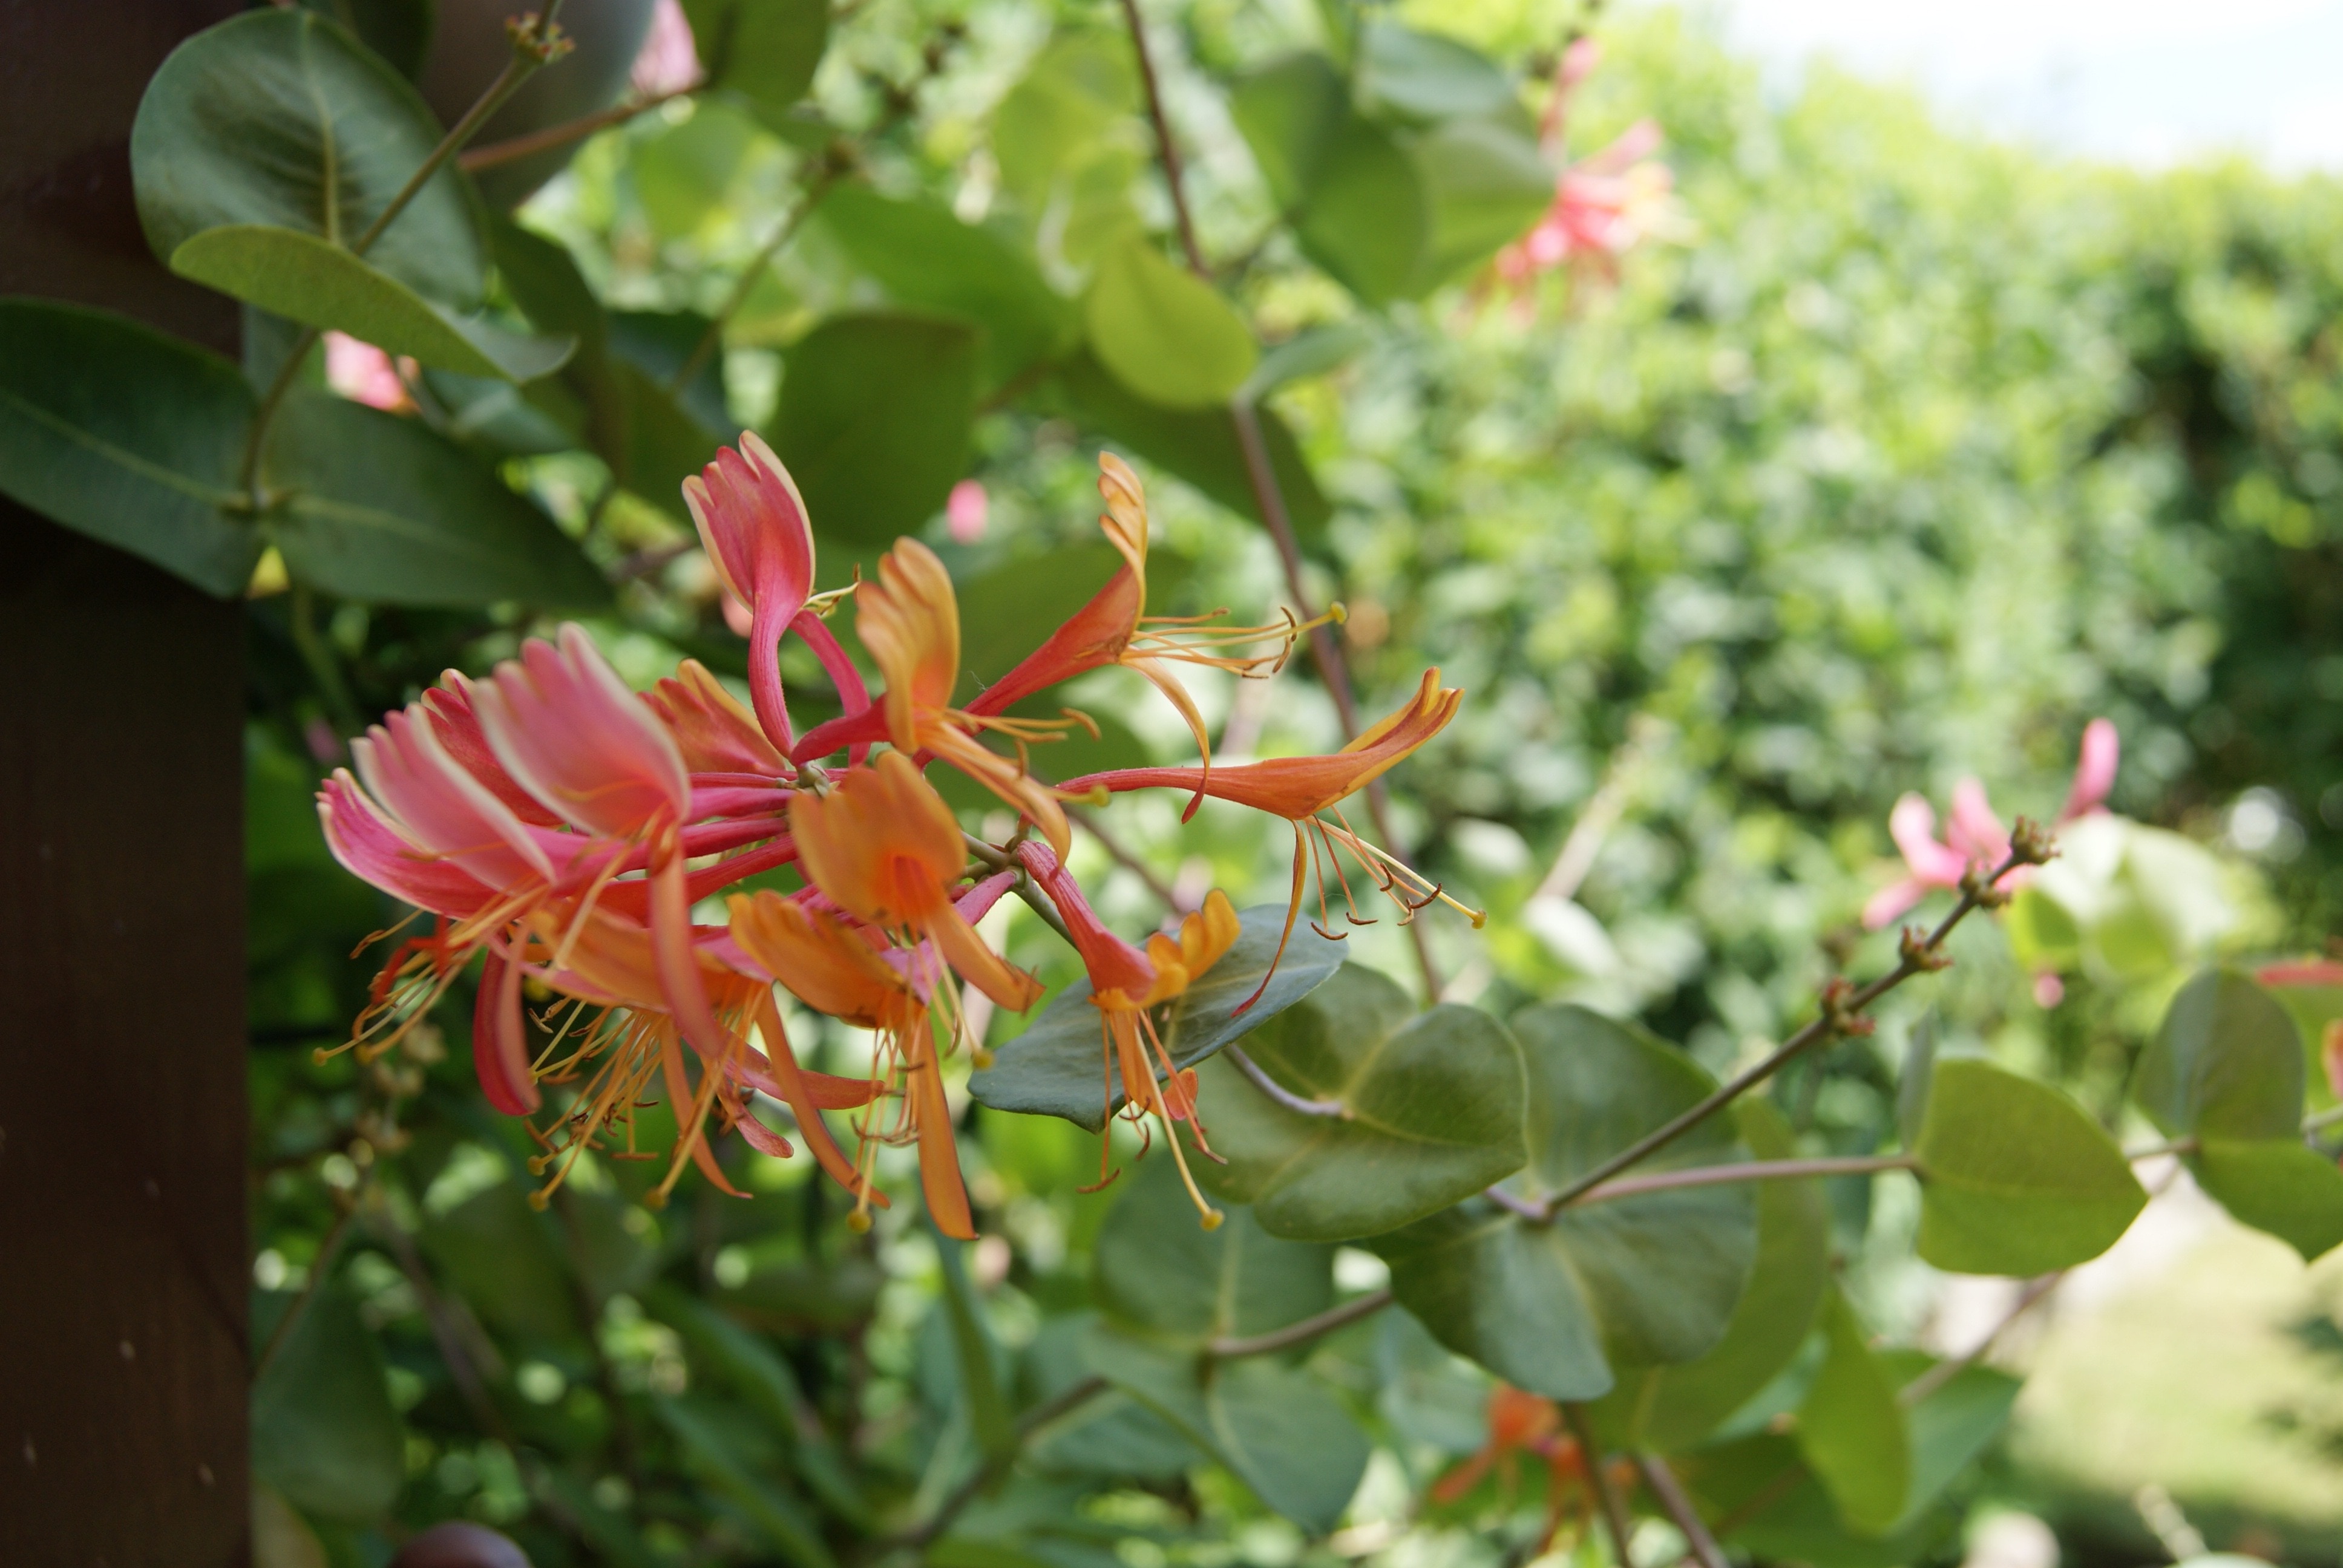 red and orange petaled flowers with green leaves